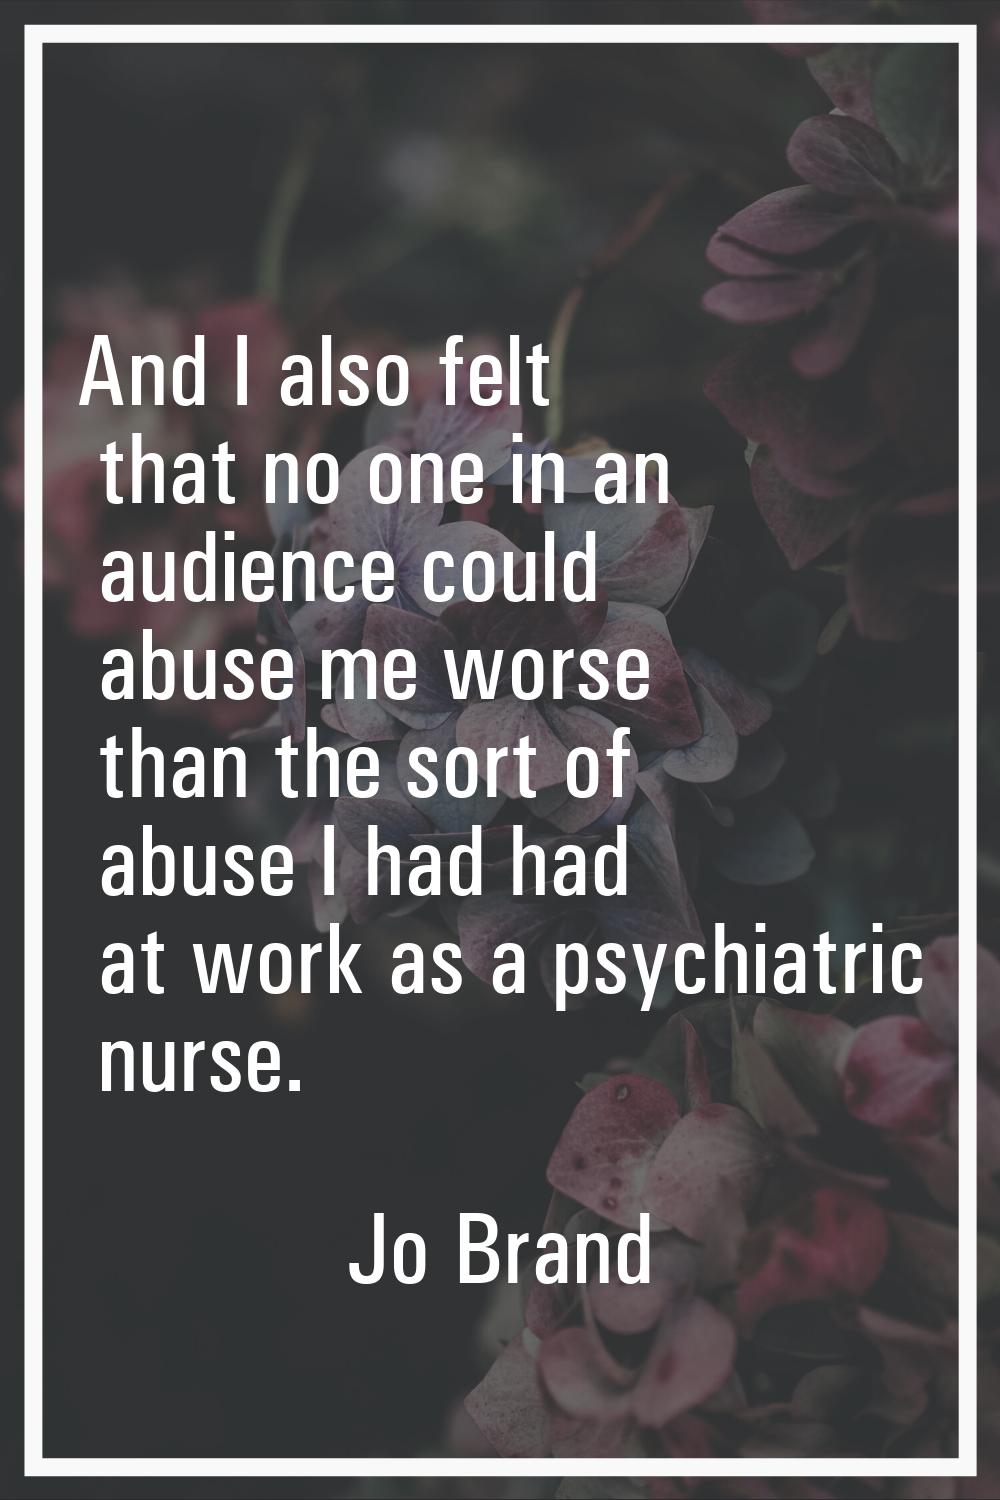 And I also felt that no one in an audience could abuse me worse than the sort of abuse I had had at